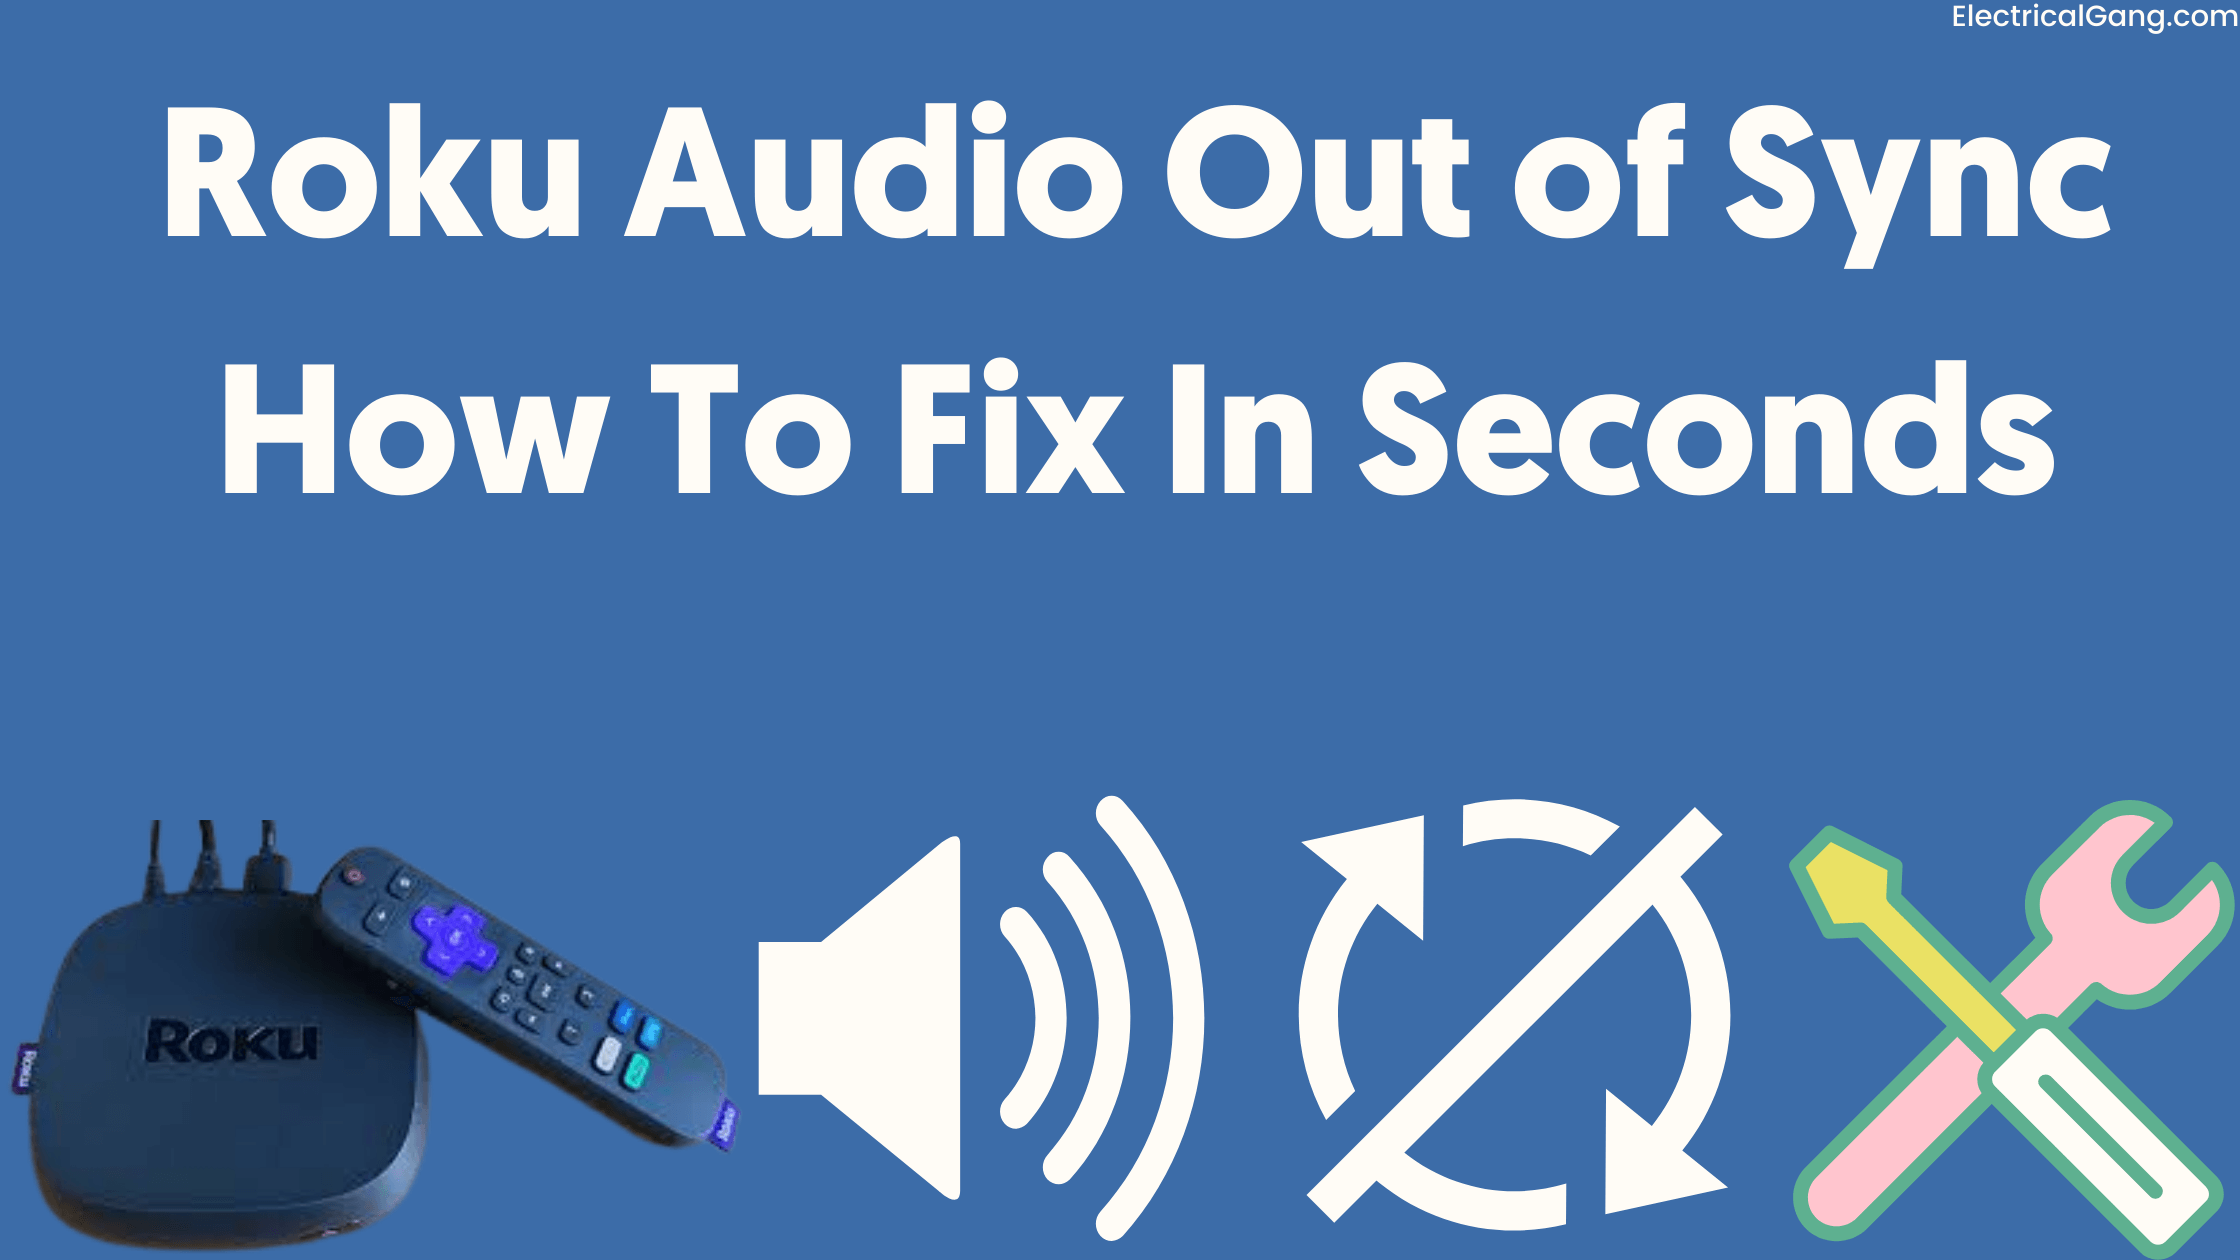 Roku Sound Out of Sync: How To Fix?